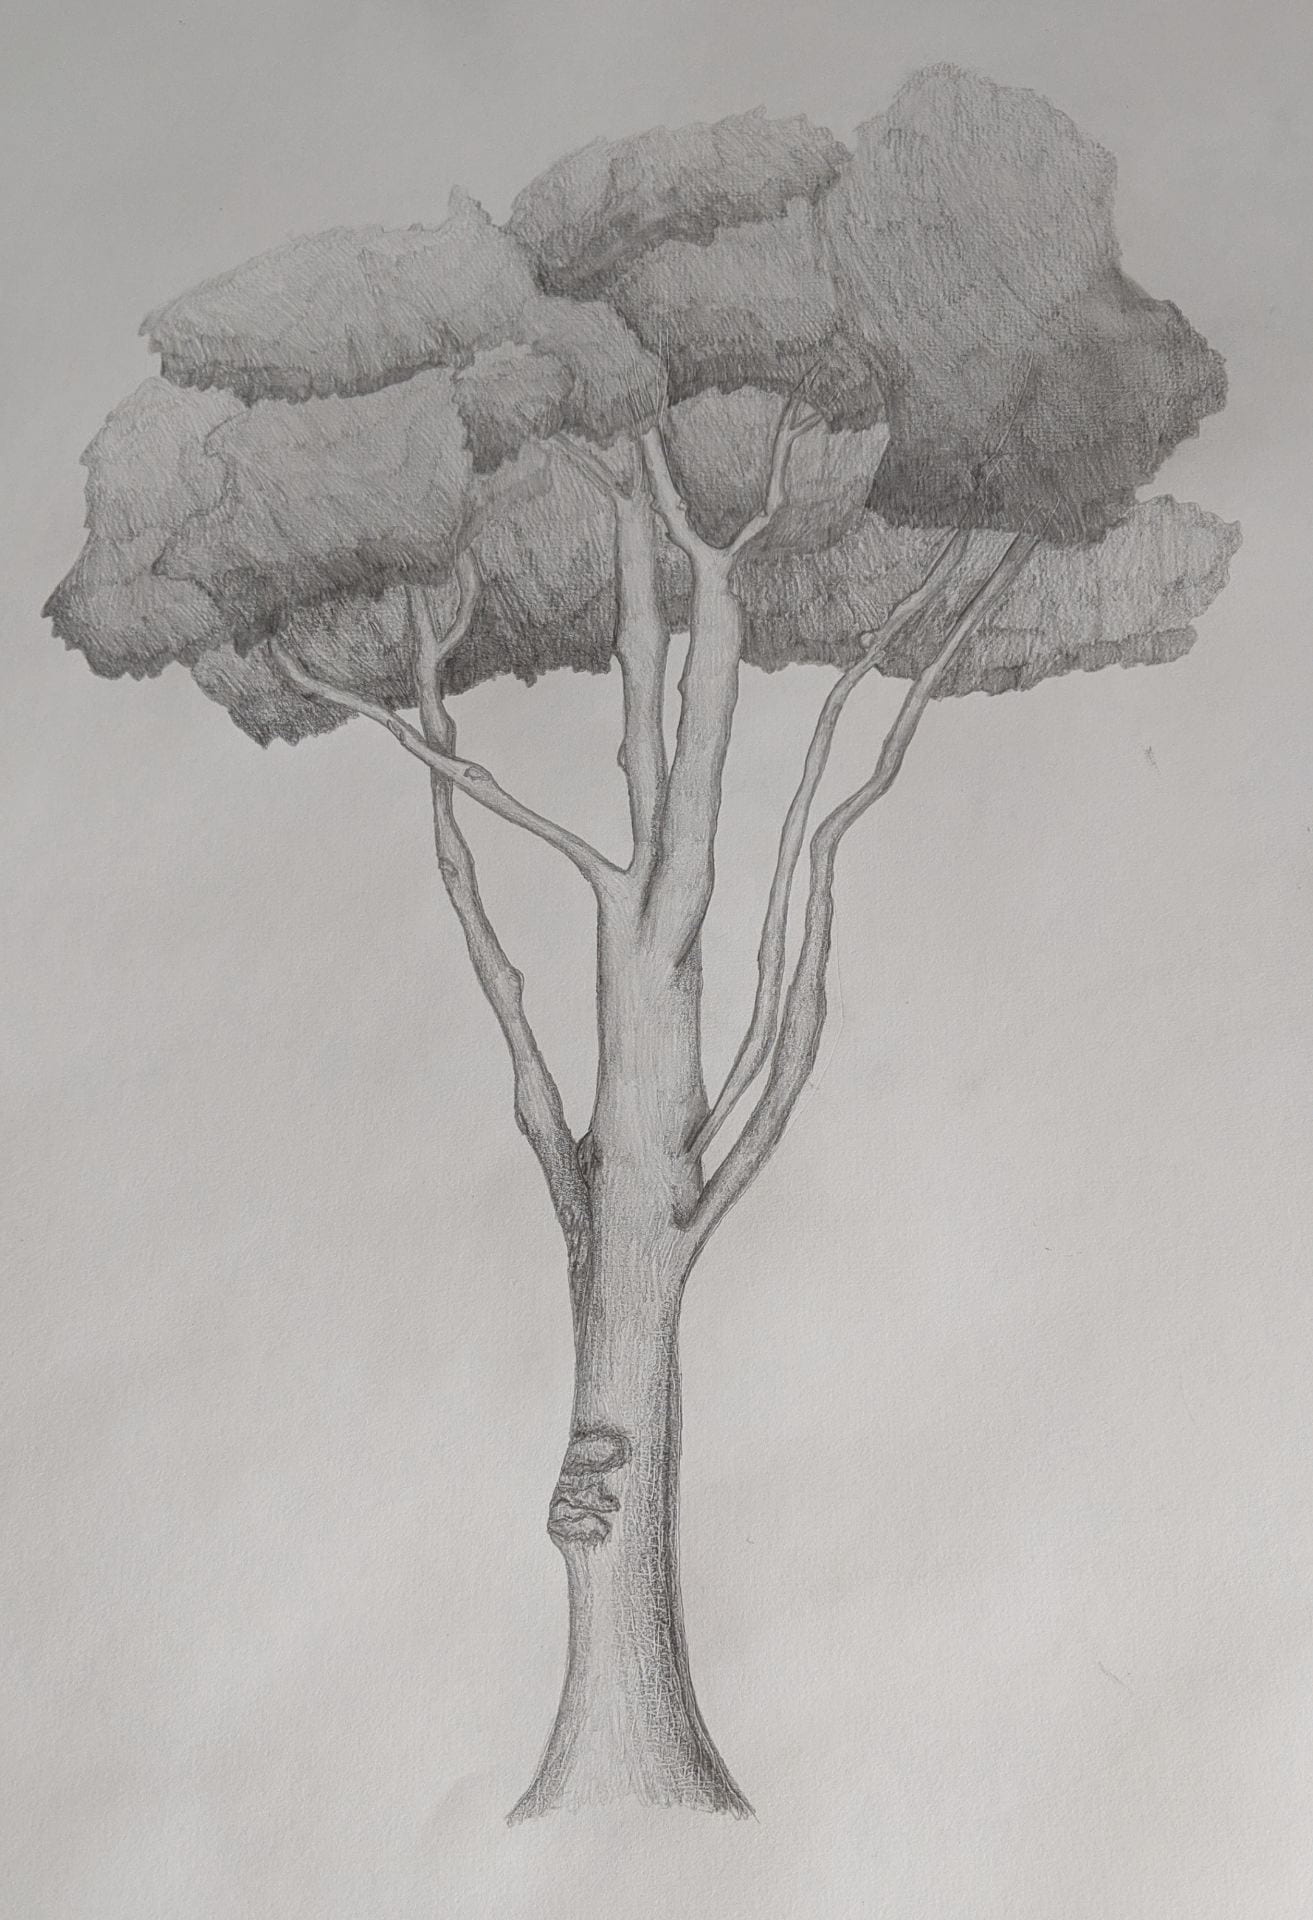 Project #2: Tree Drawing